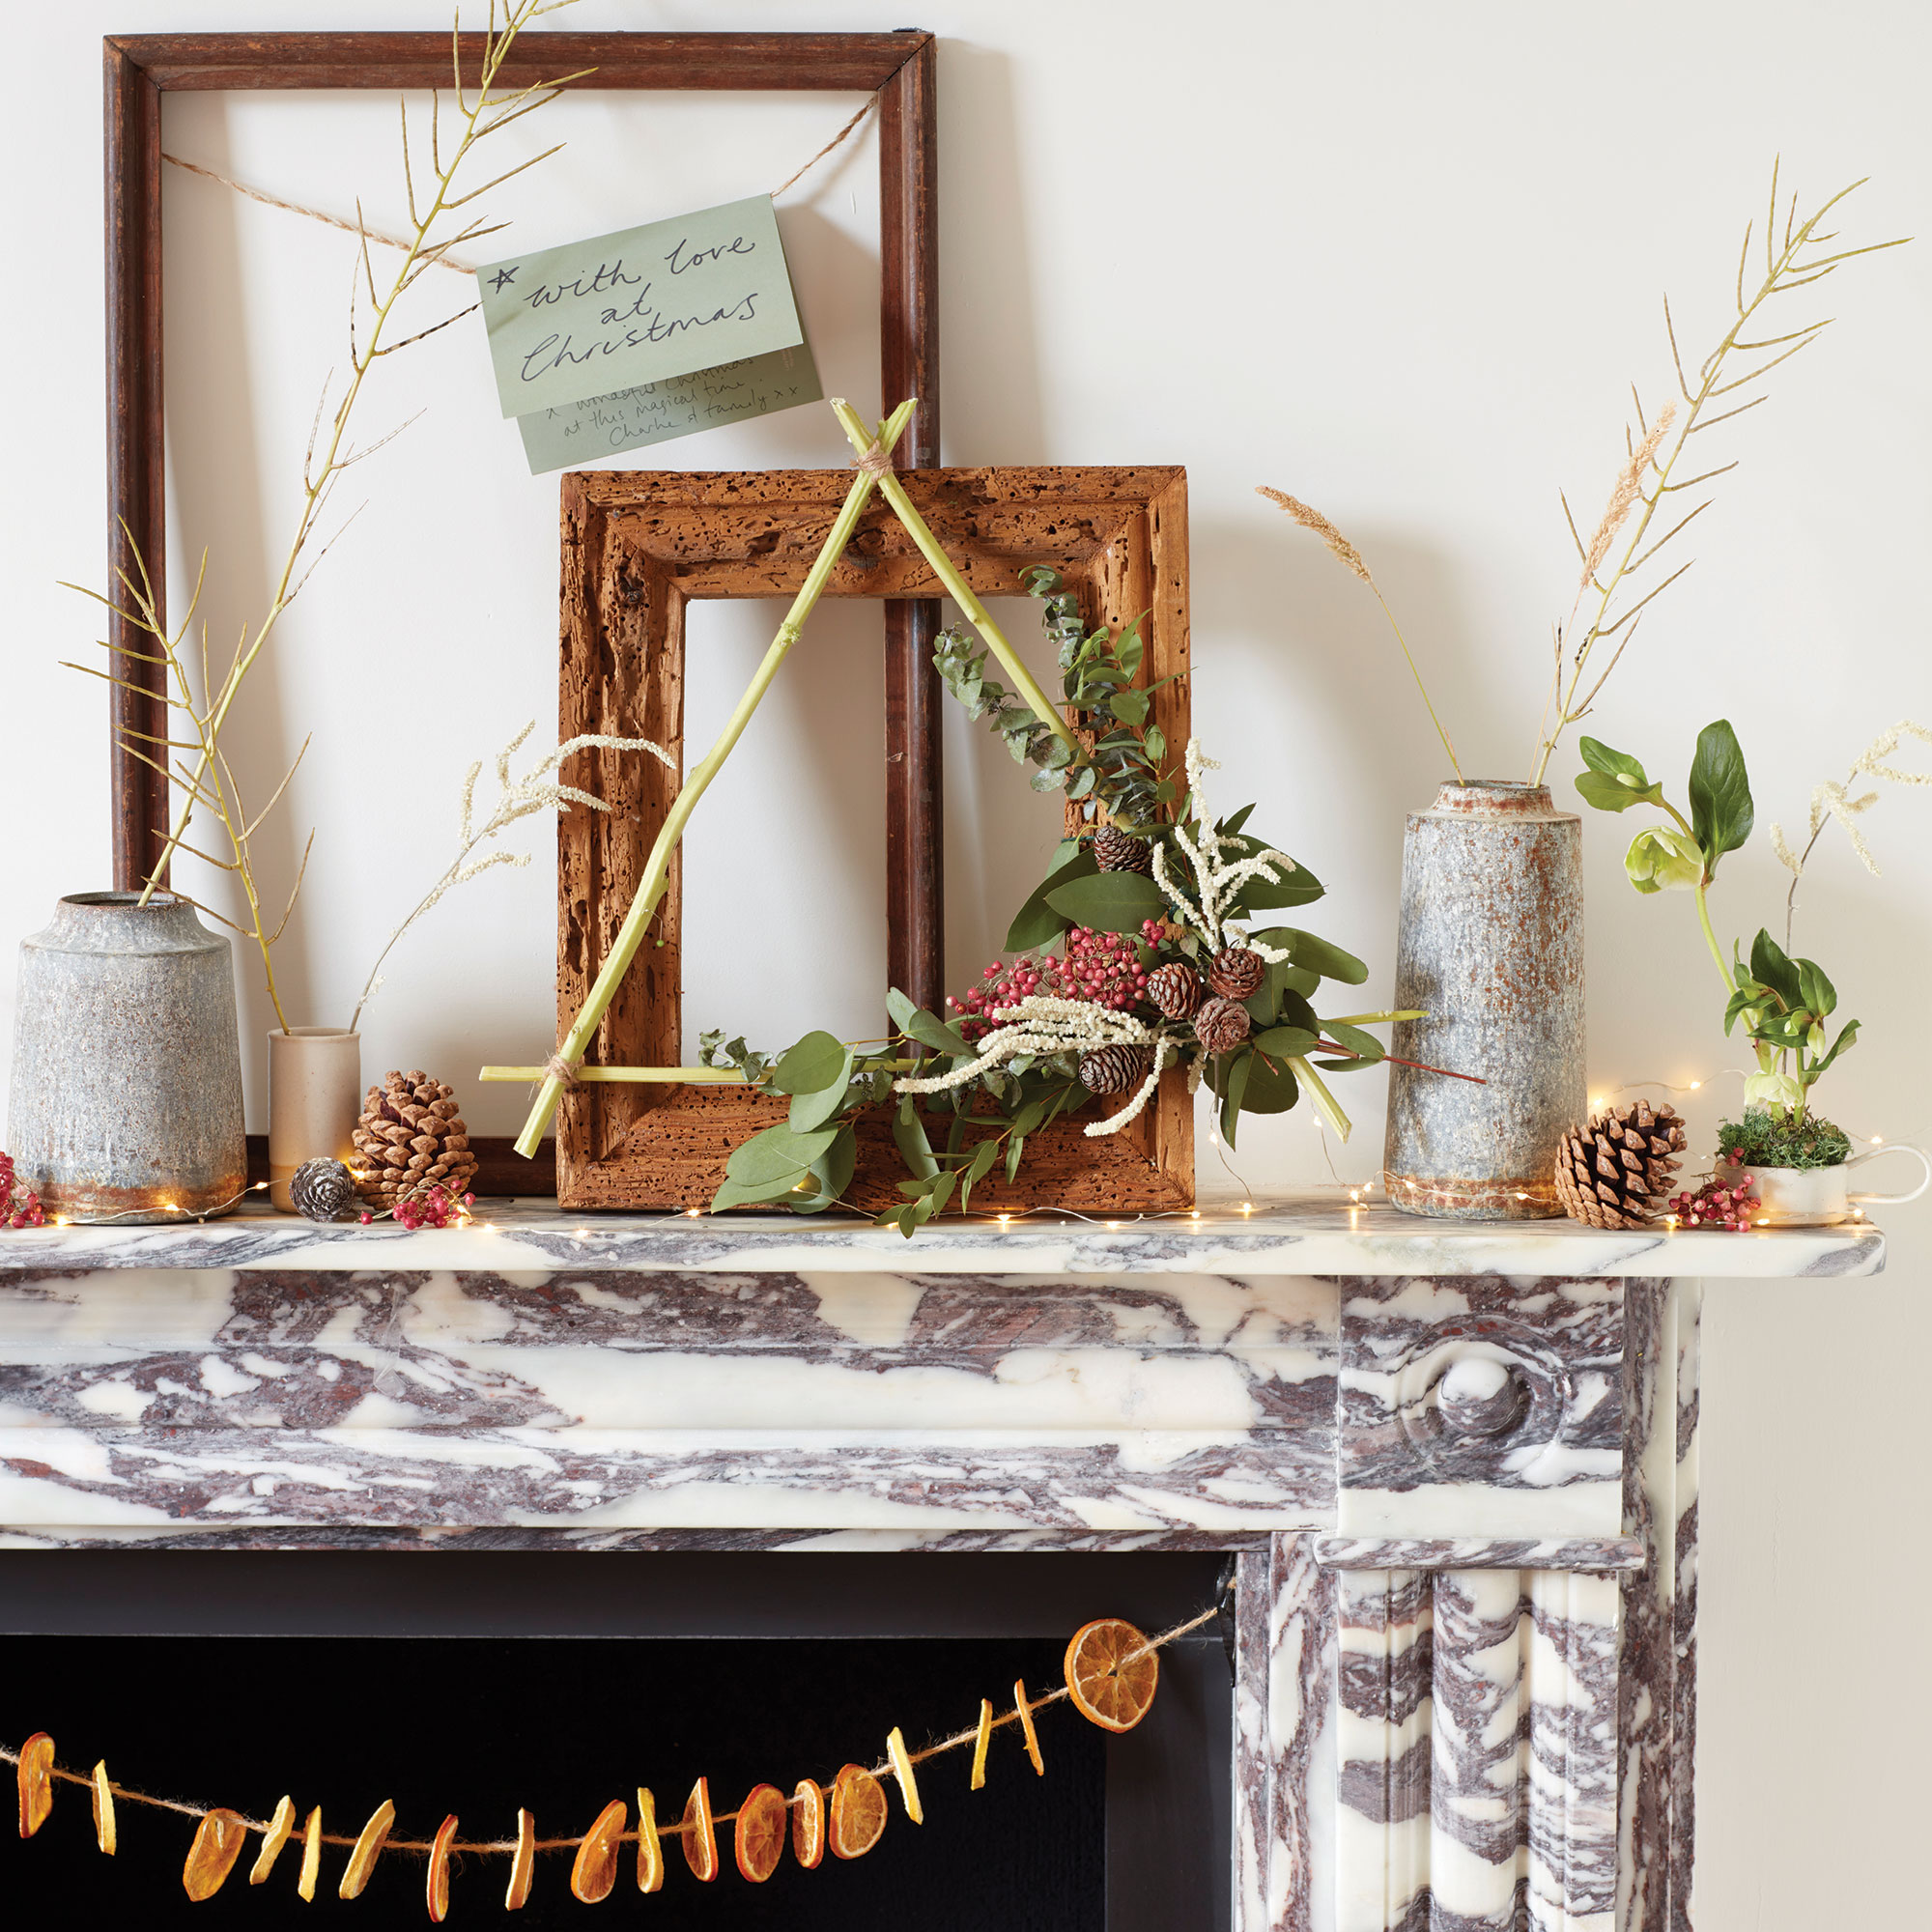 Easy DIY Glitter Ornaments and a Rustic Wintery Mantelscape